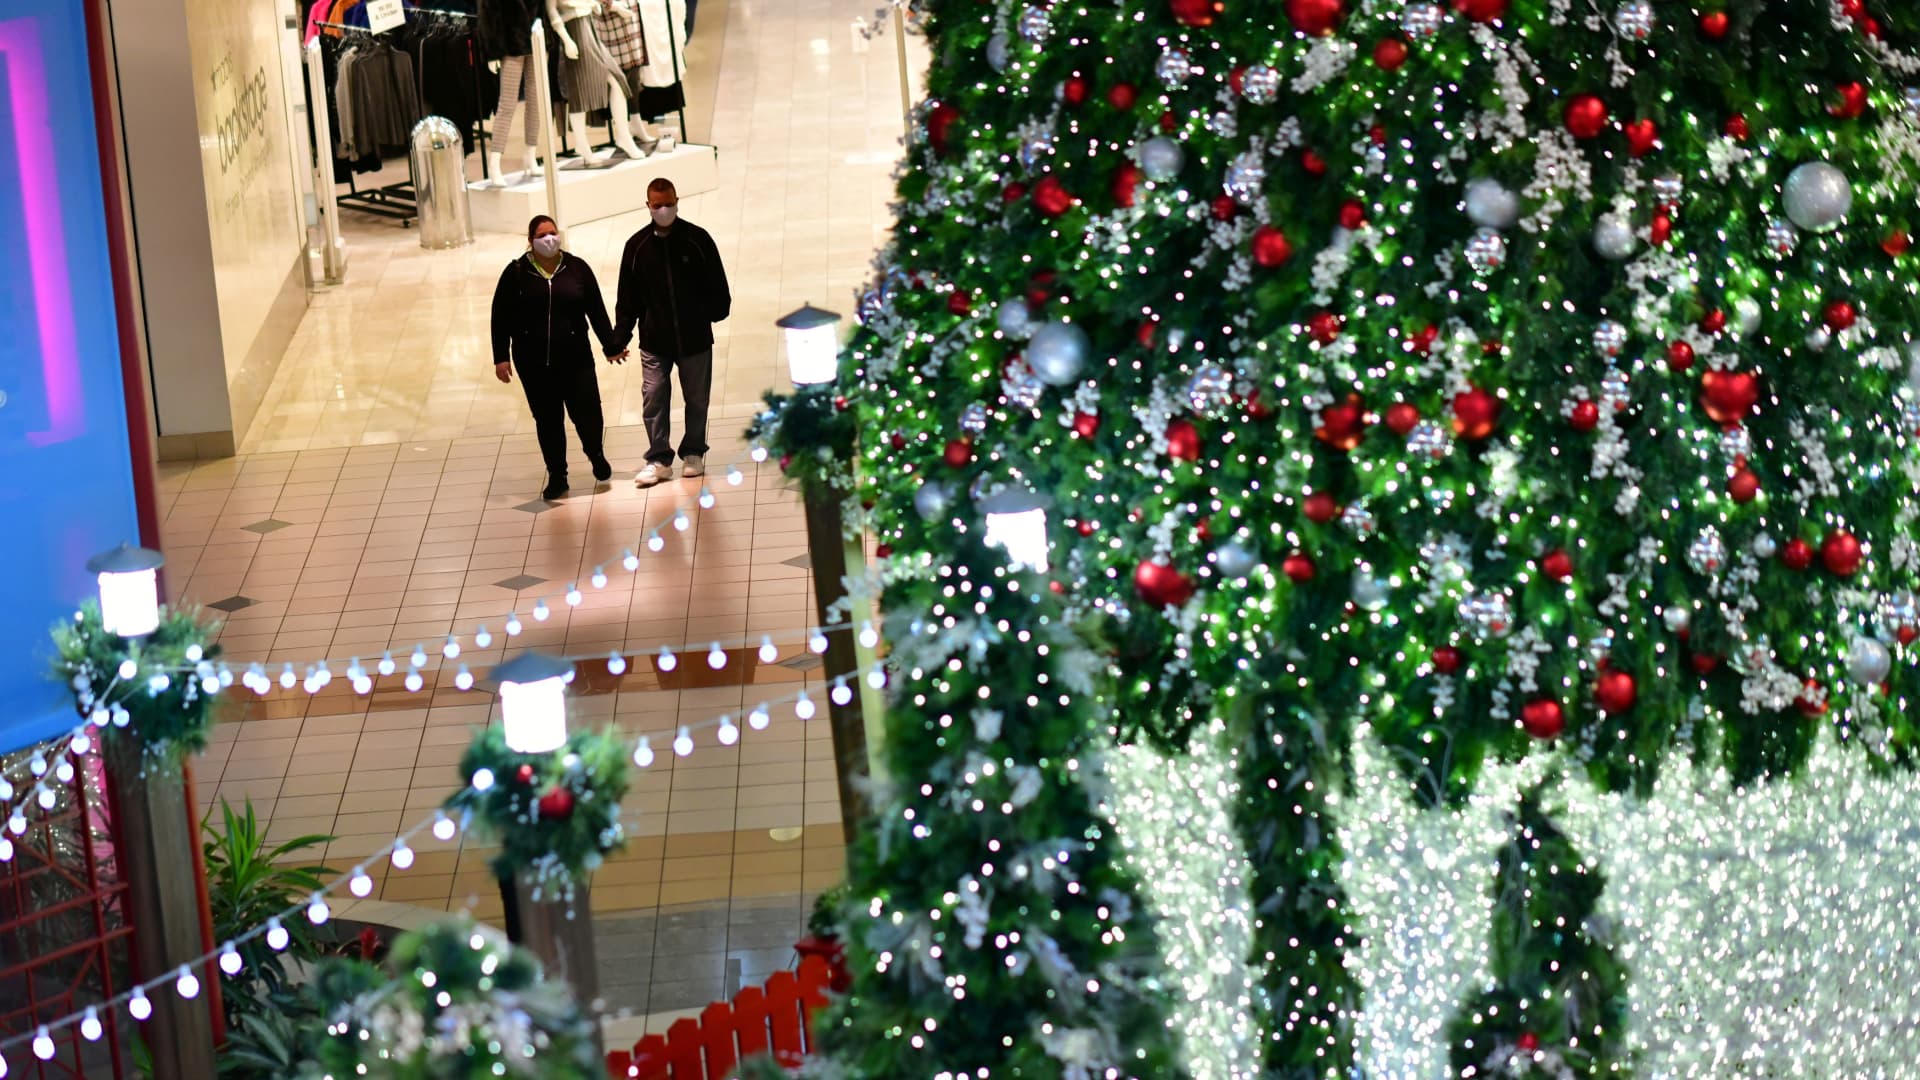 Consumers are cutting back on Christmas gift purchases amid higher inflation